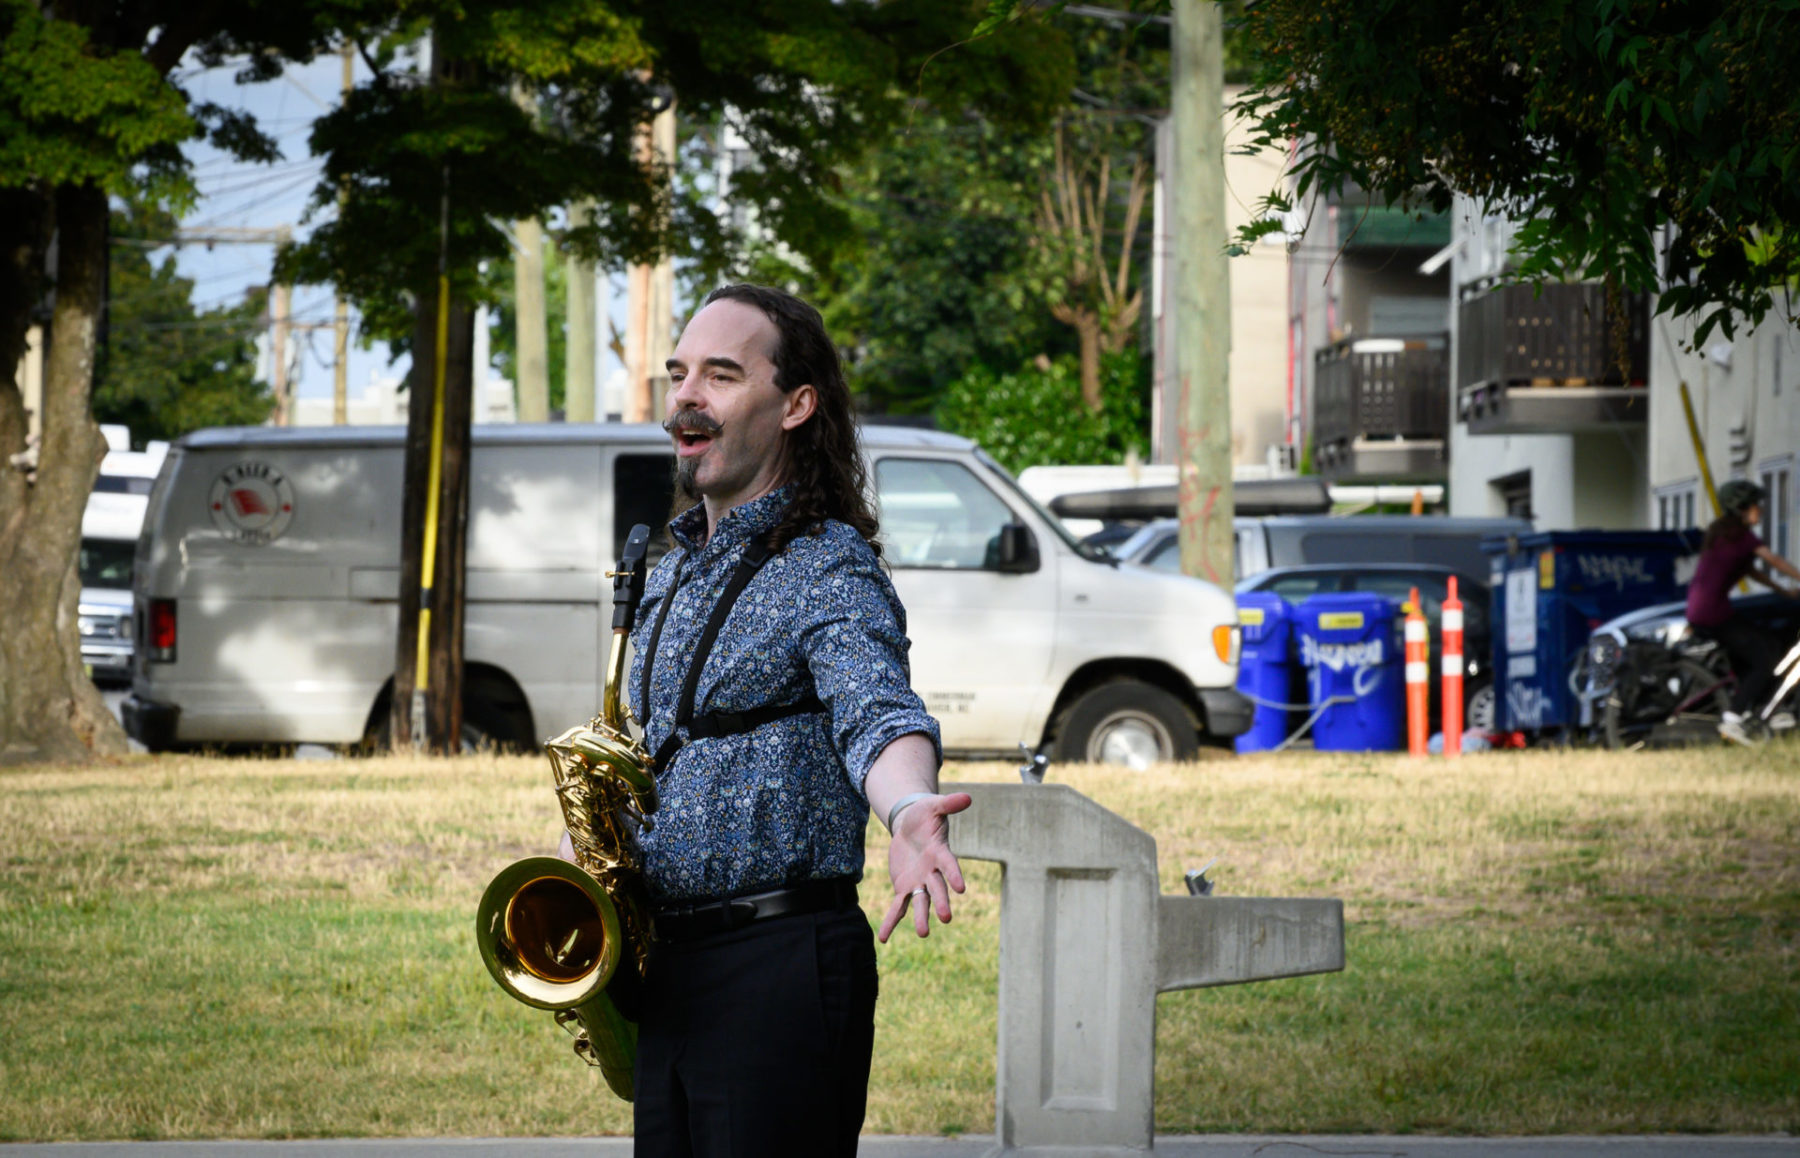 Colin MacDonald in a blue shirt with his saxophone speaking at the park performance